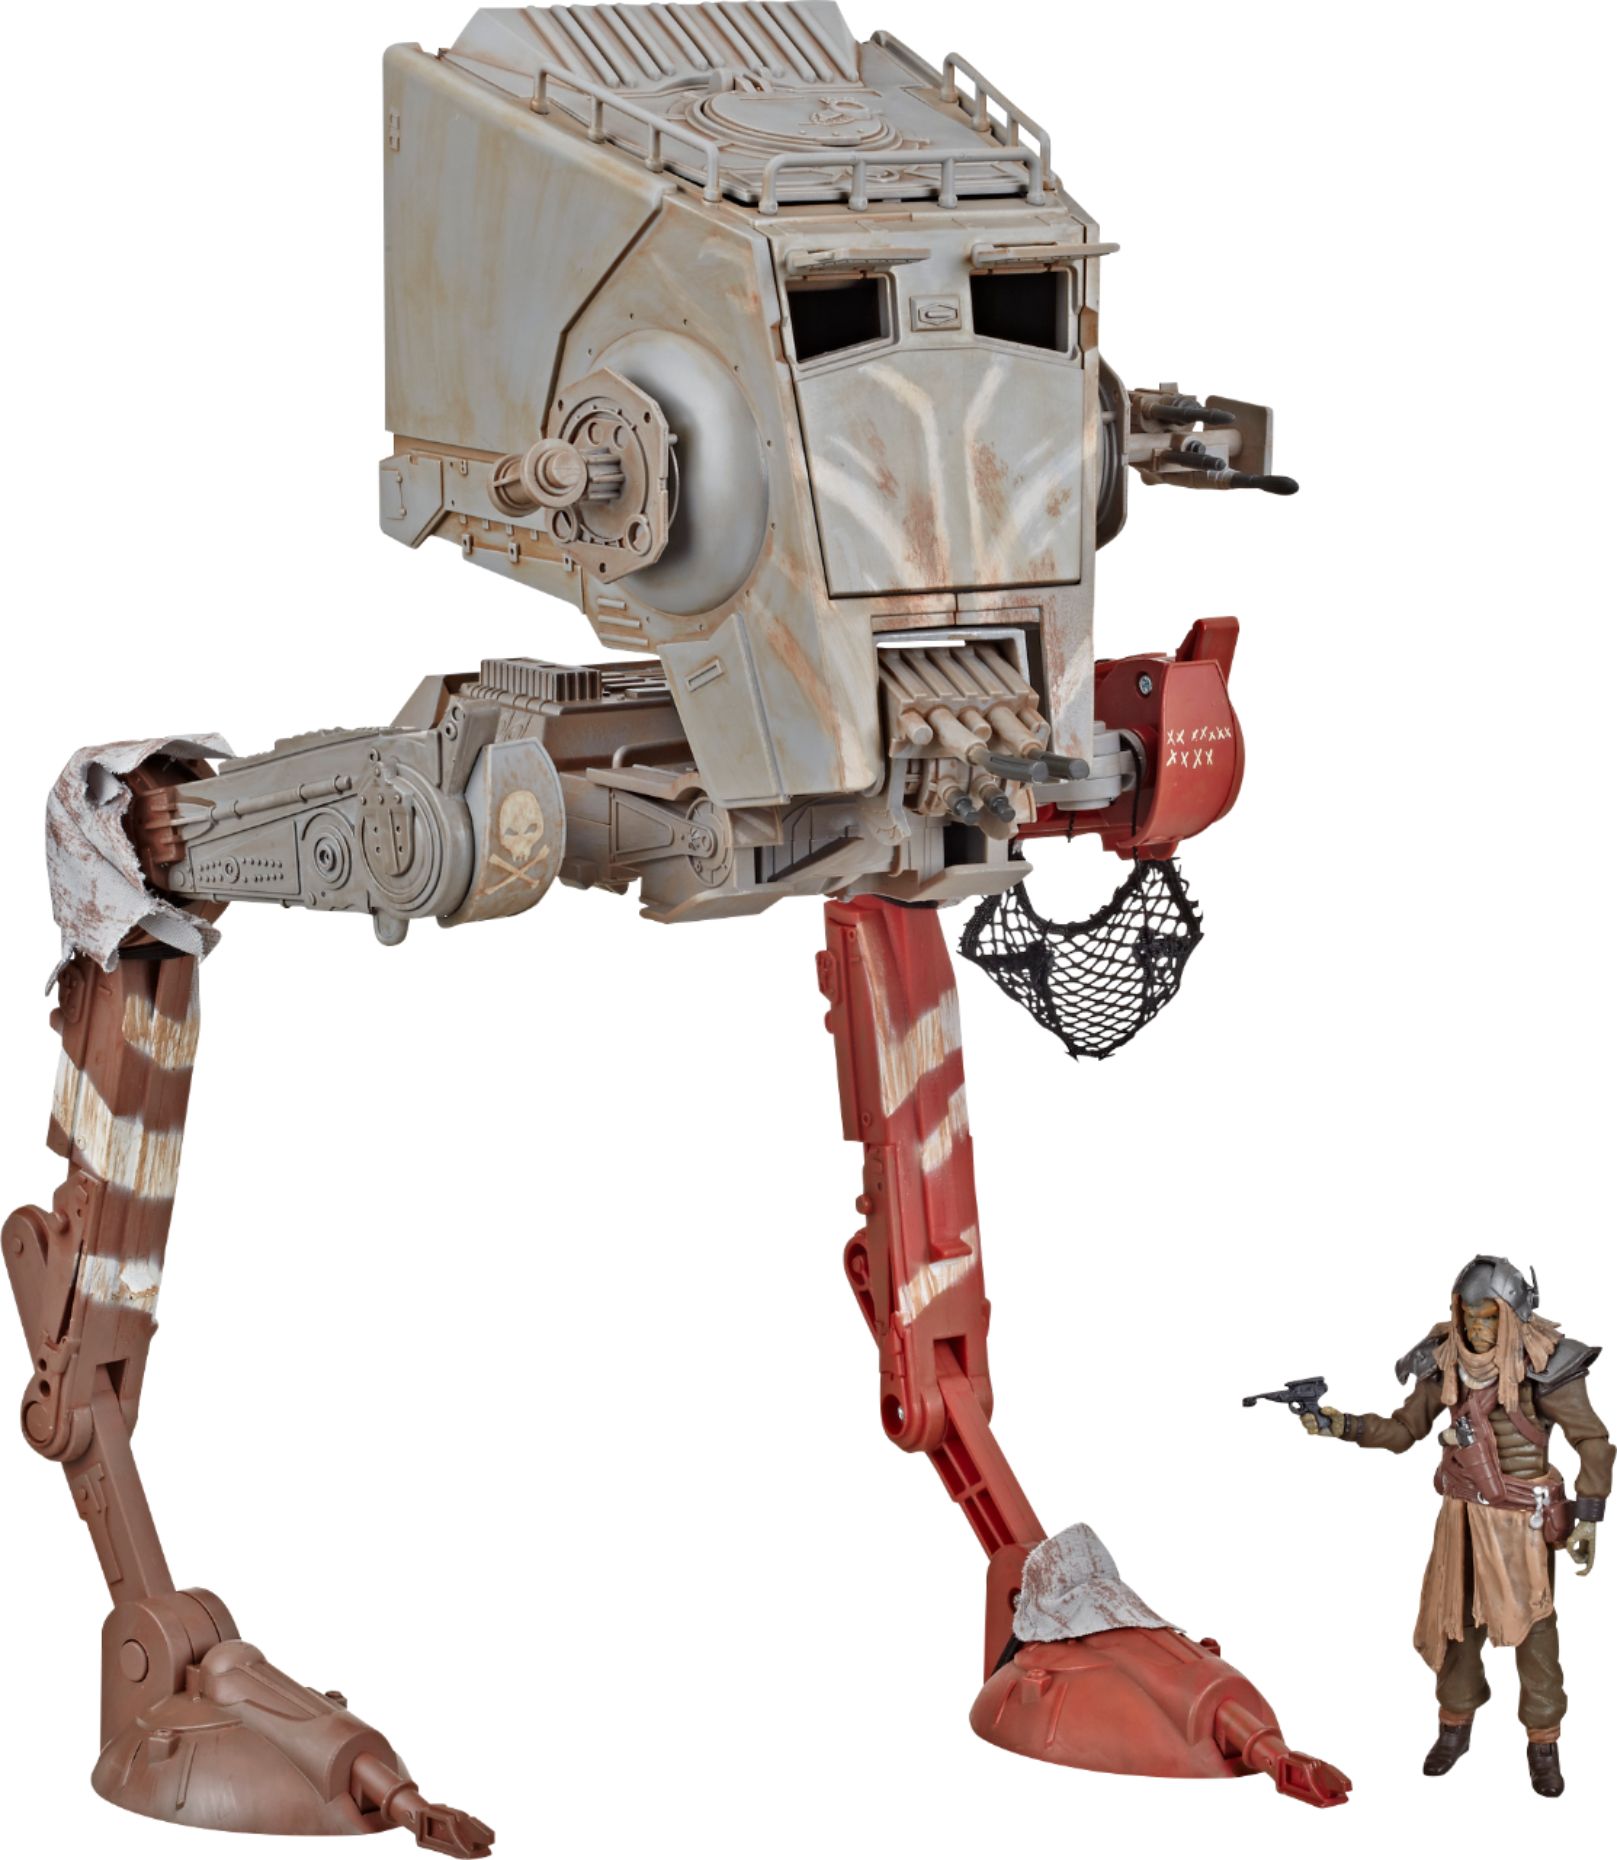 Hasbro Star Wars Return Of The Jedi AT-ST Scout Walker Action Figure for sale online 